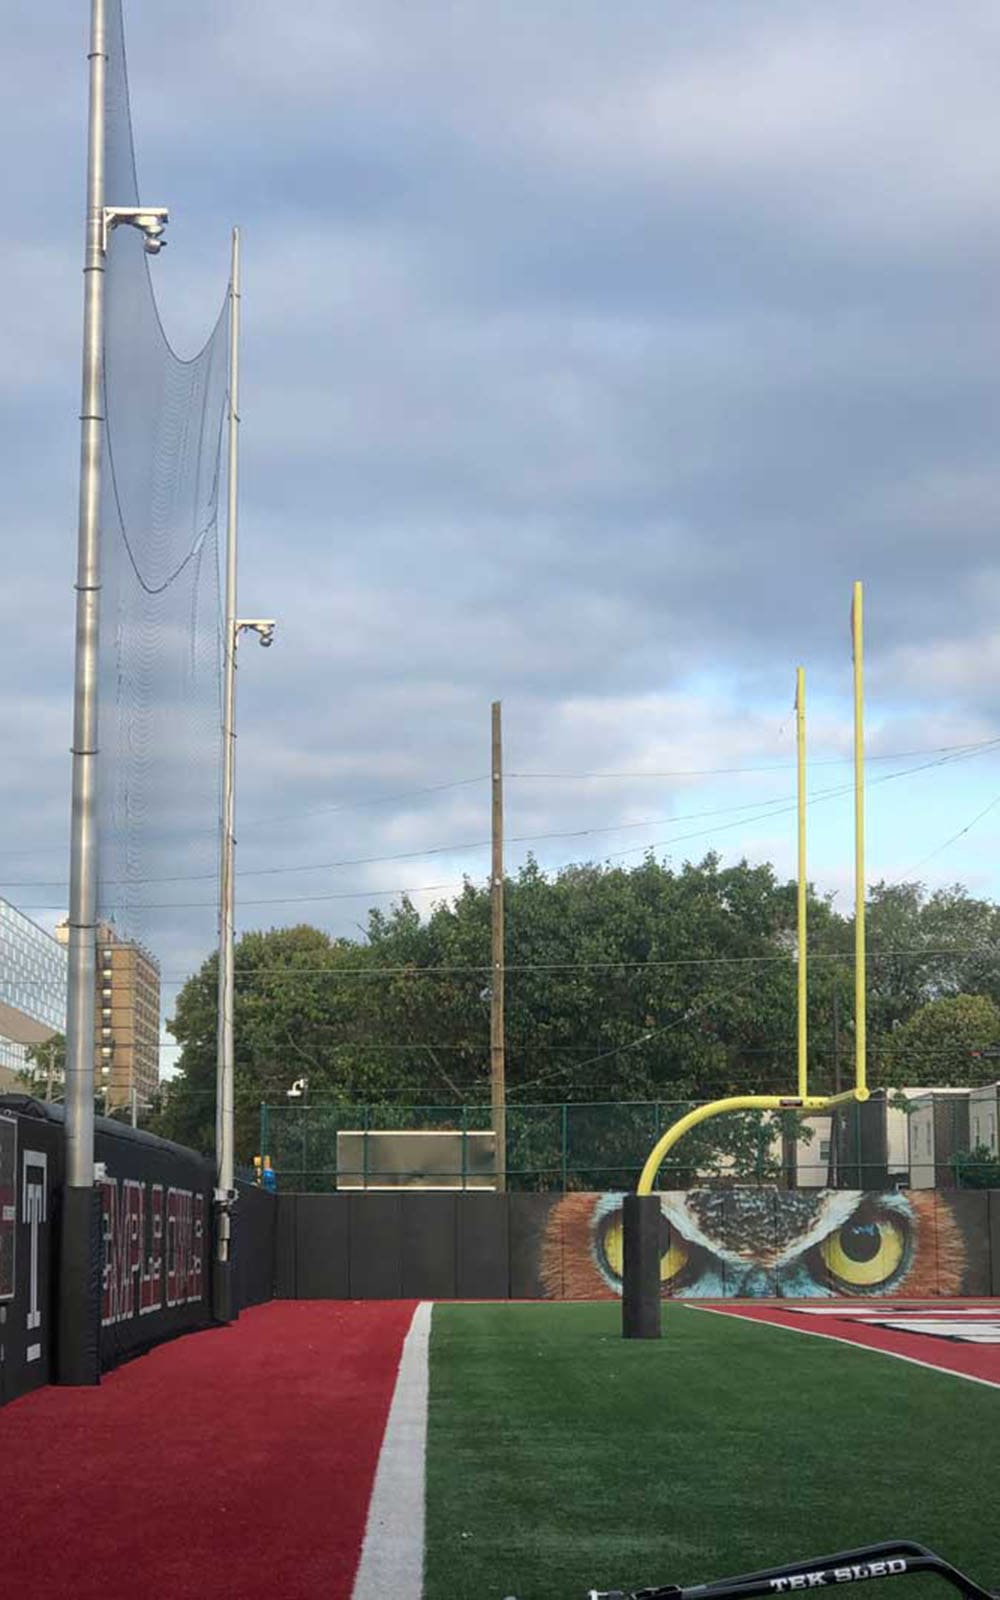 Fixed remote camera installed at Temple practice field.